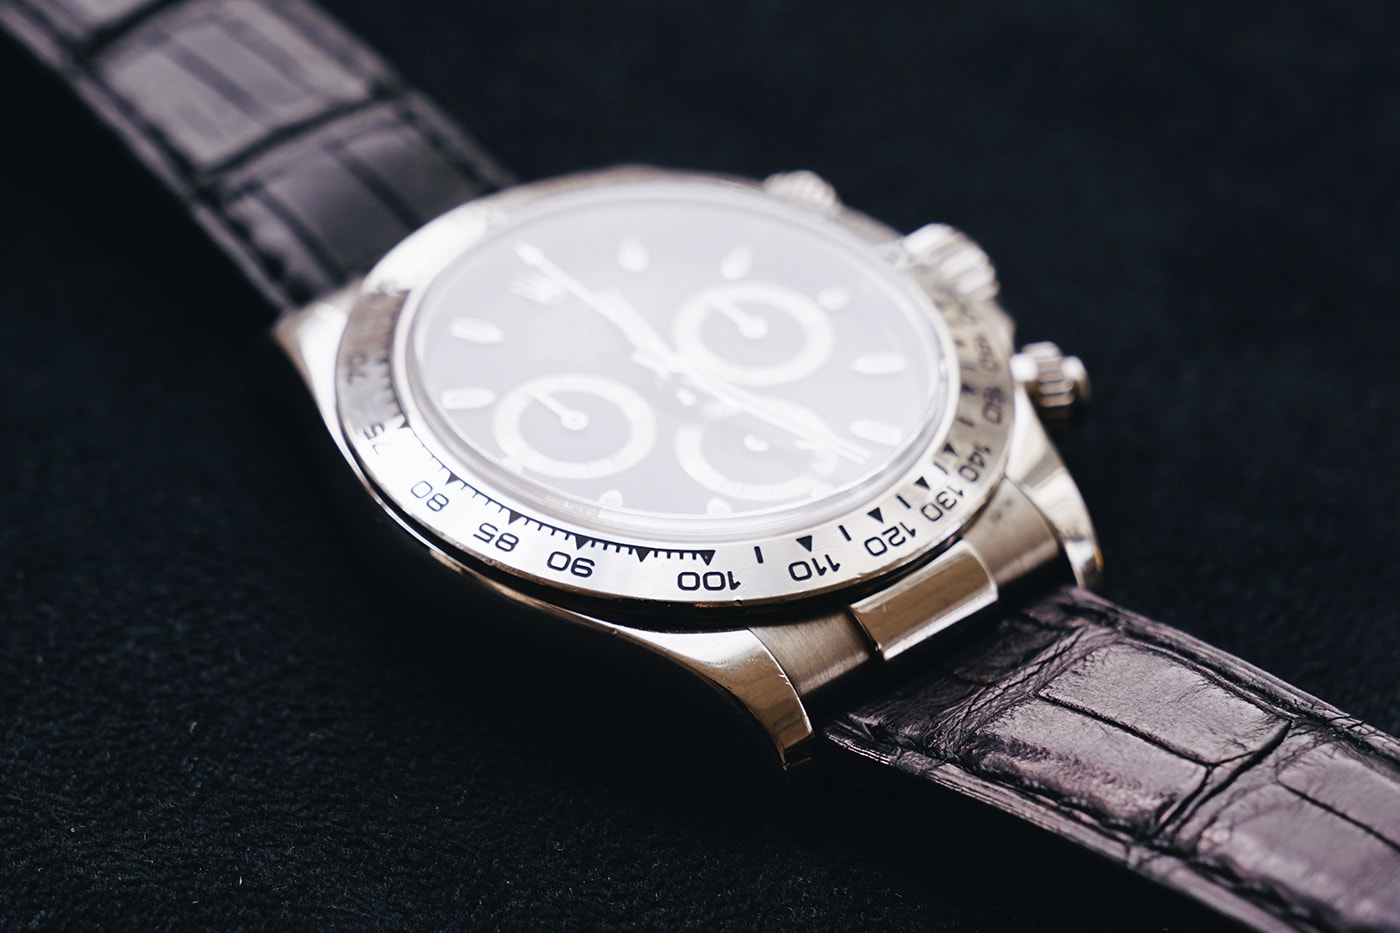 Paul Newman Rolex Daytona Important Watches Sotheby’s New York Auction Info